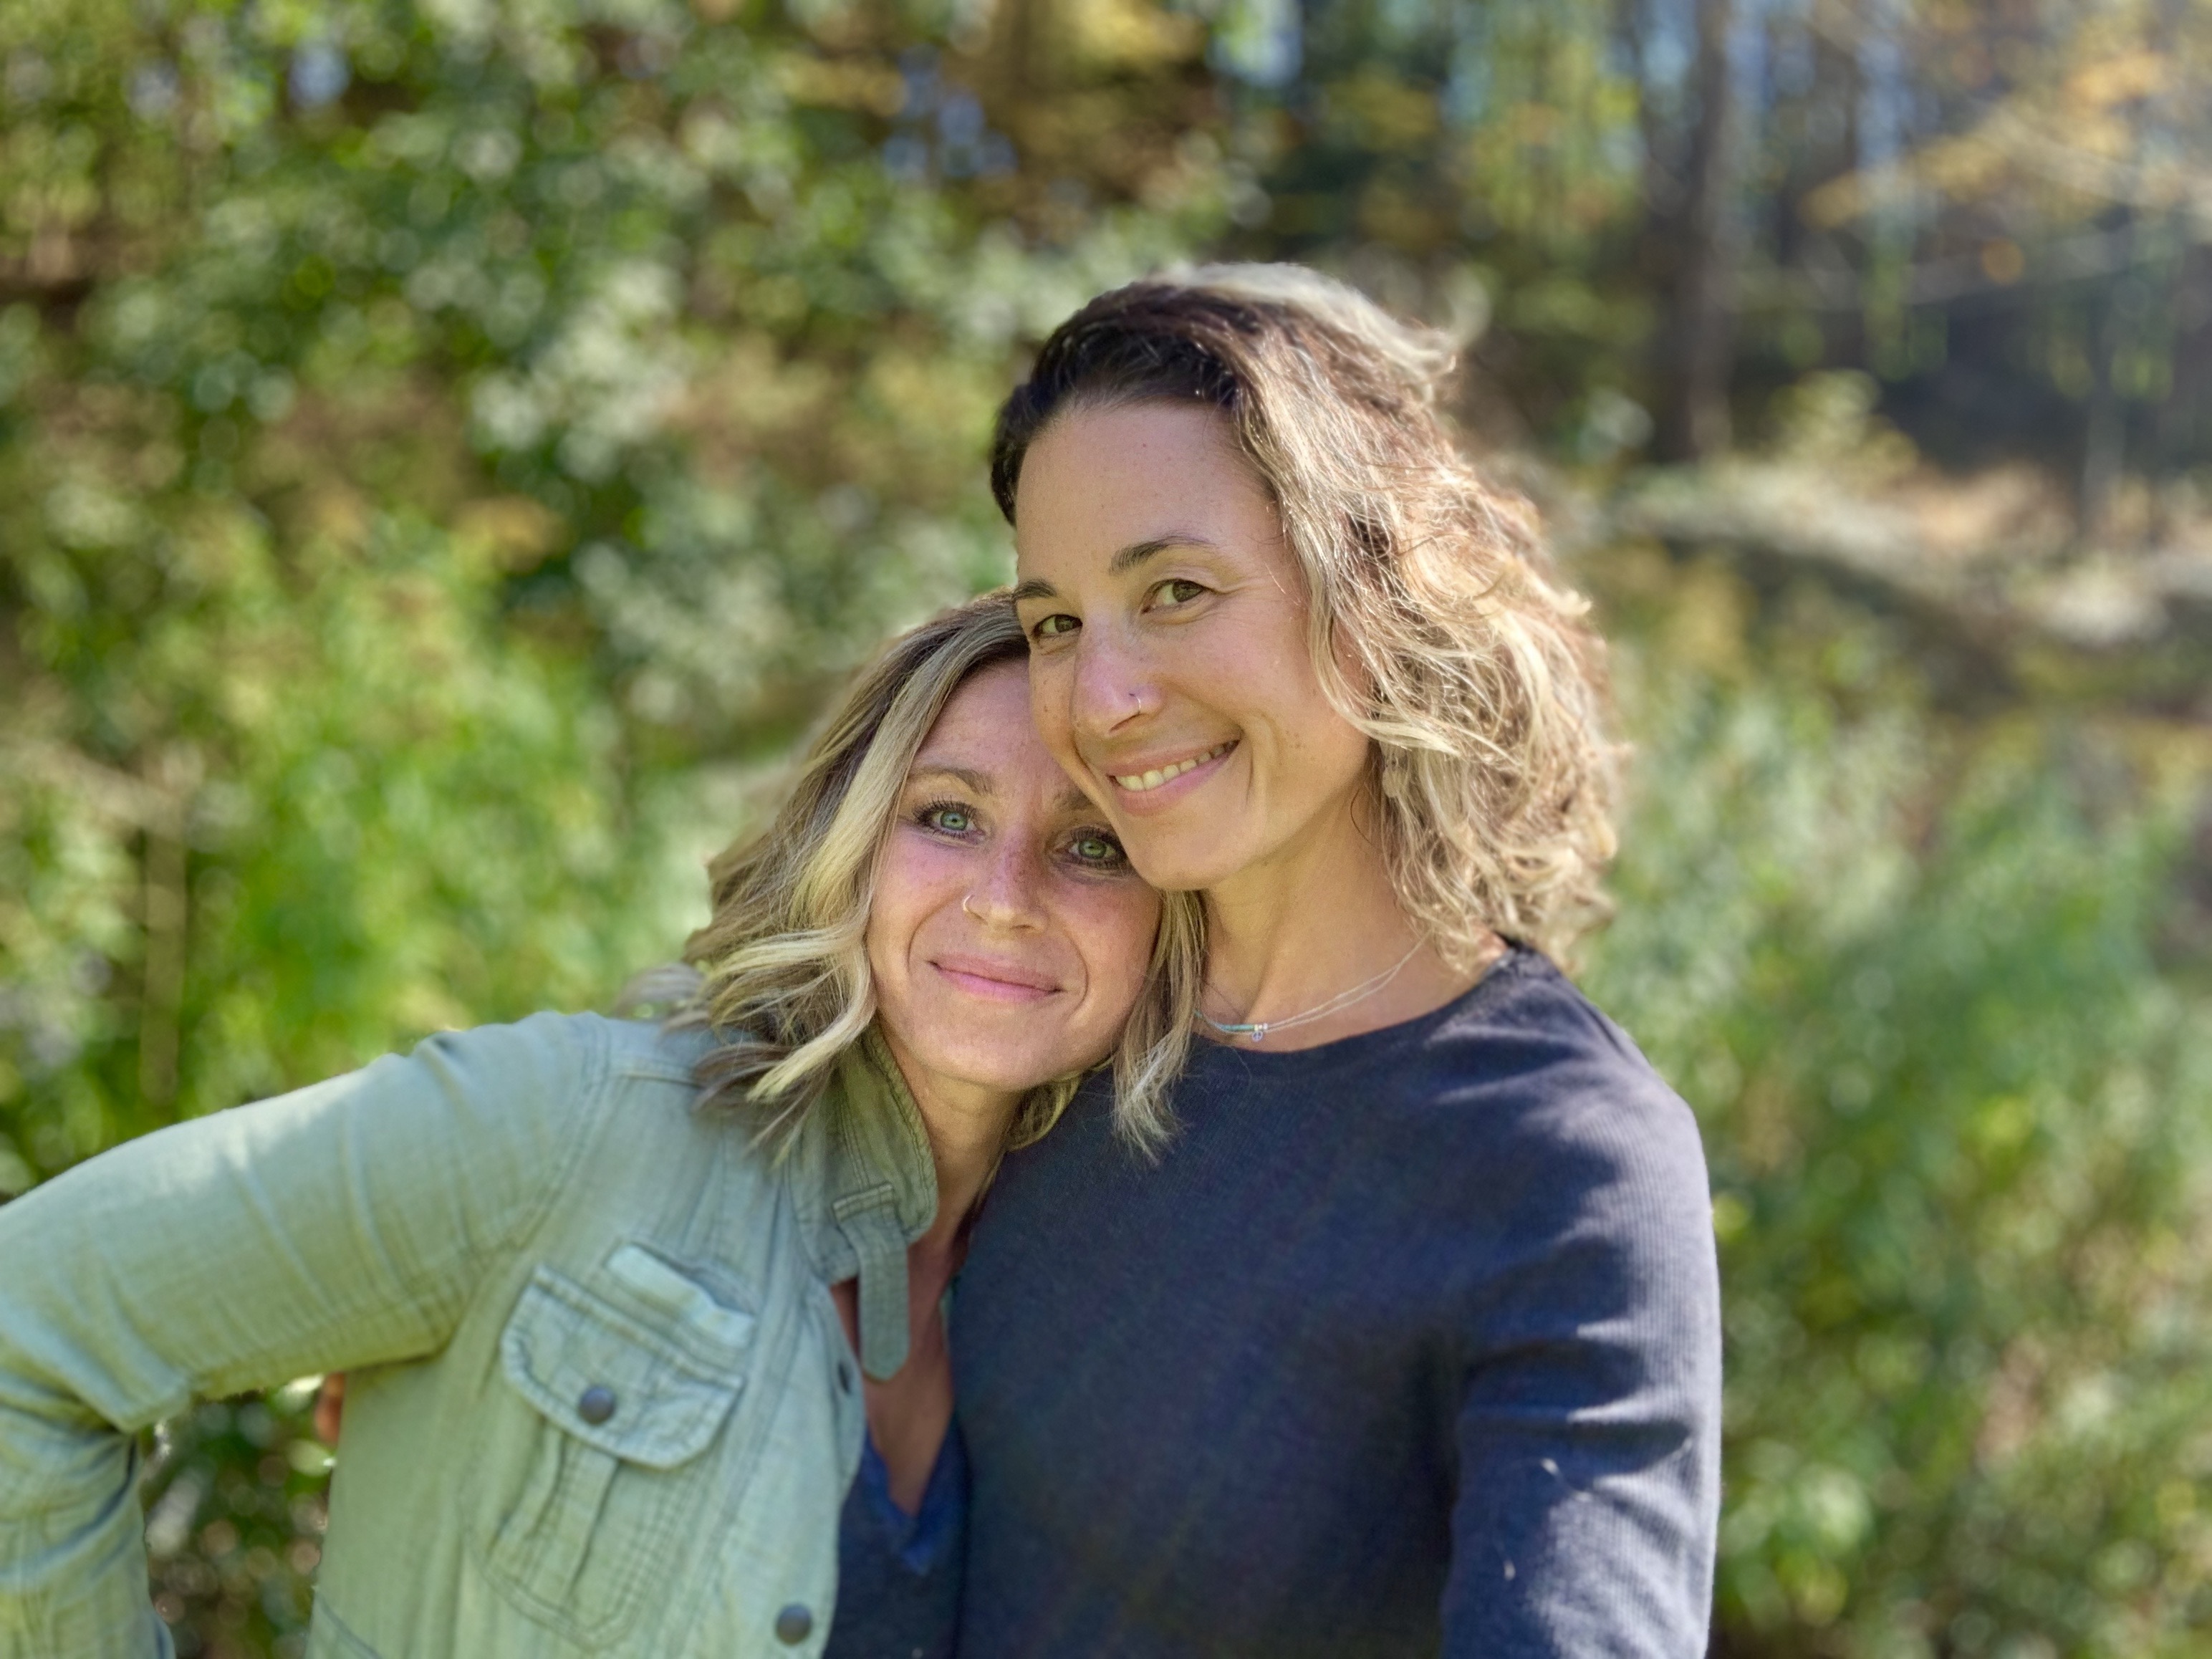 Nicole and Megan founders of Klo Organic Beauty